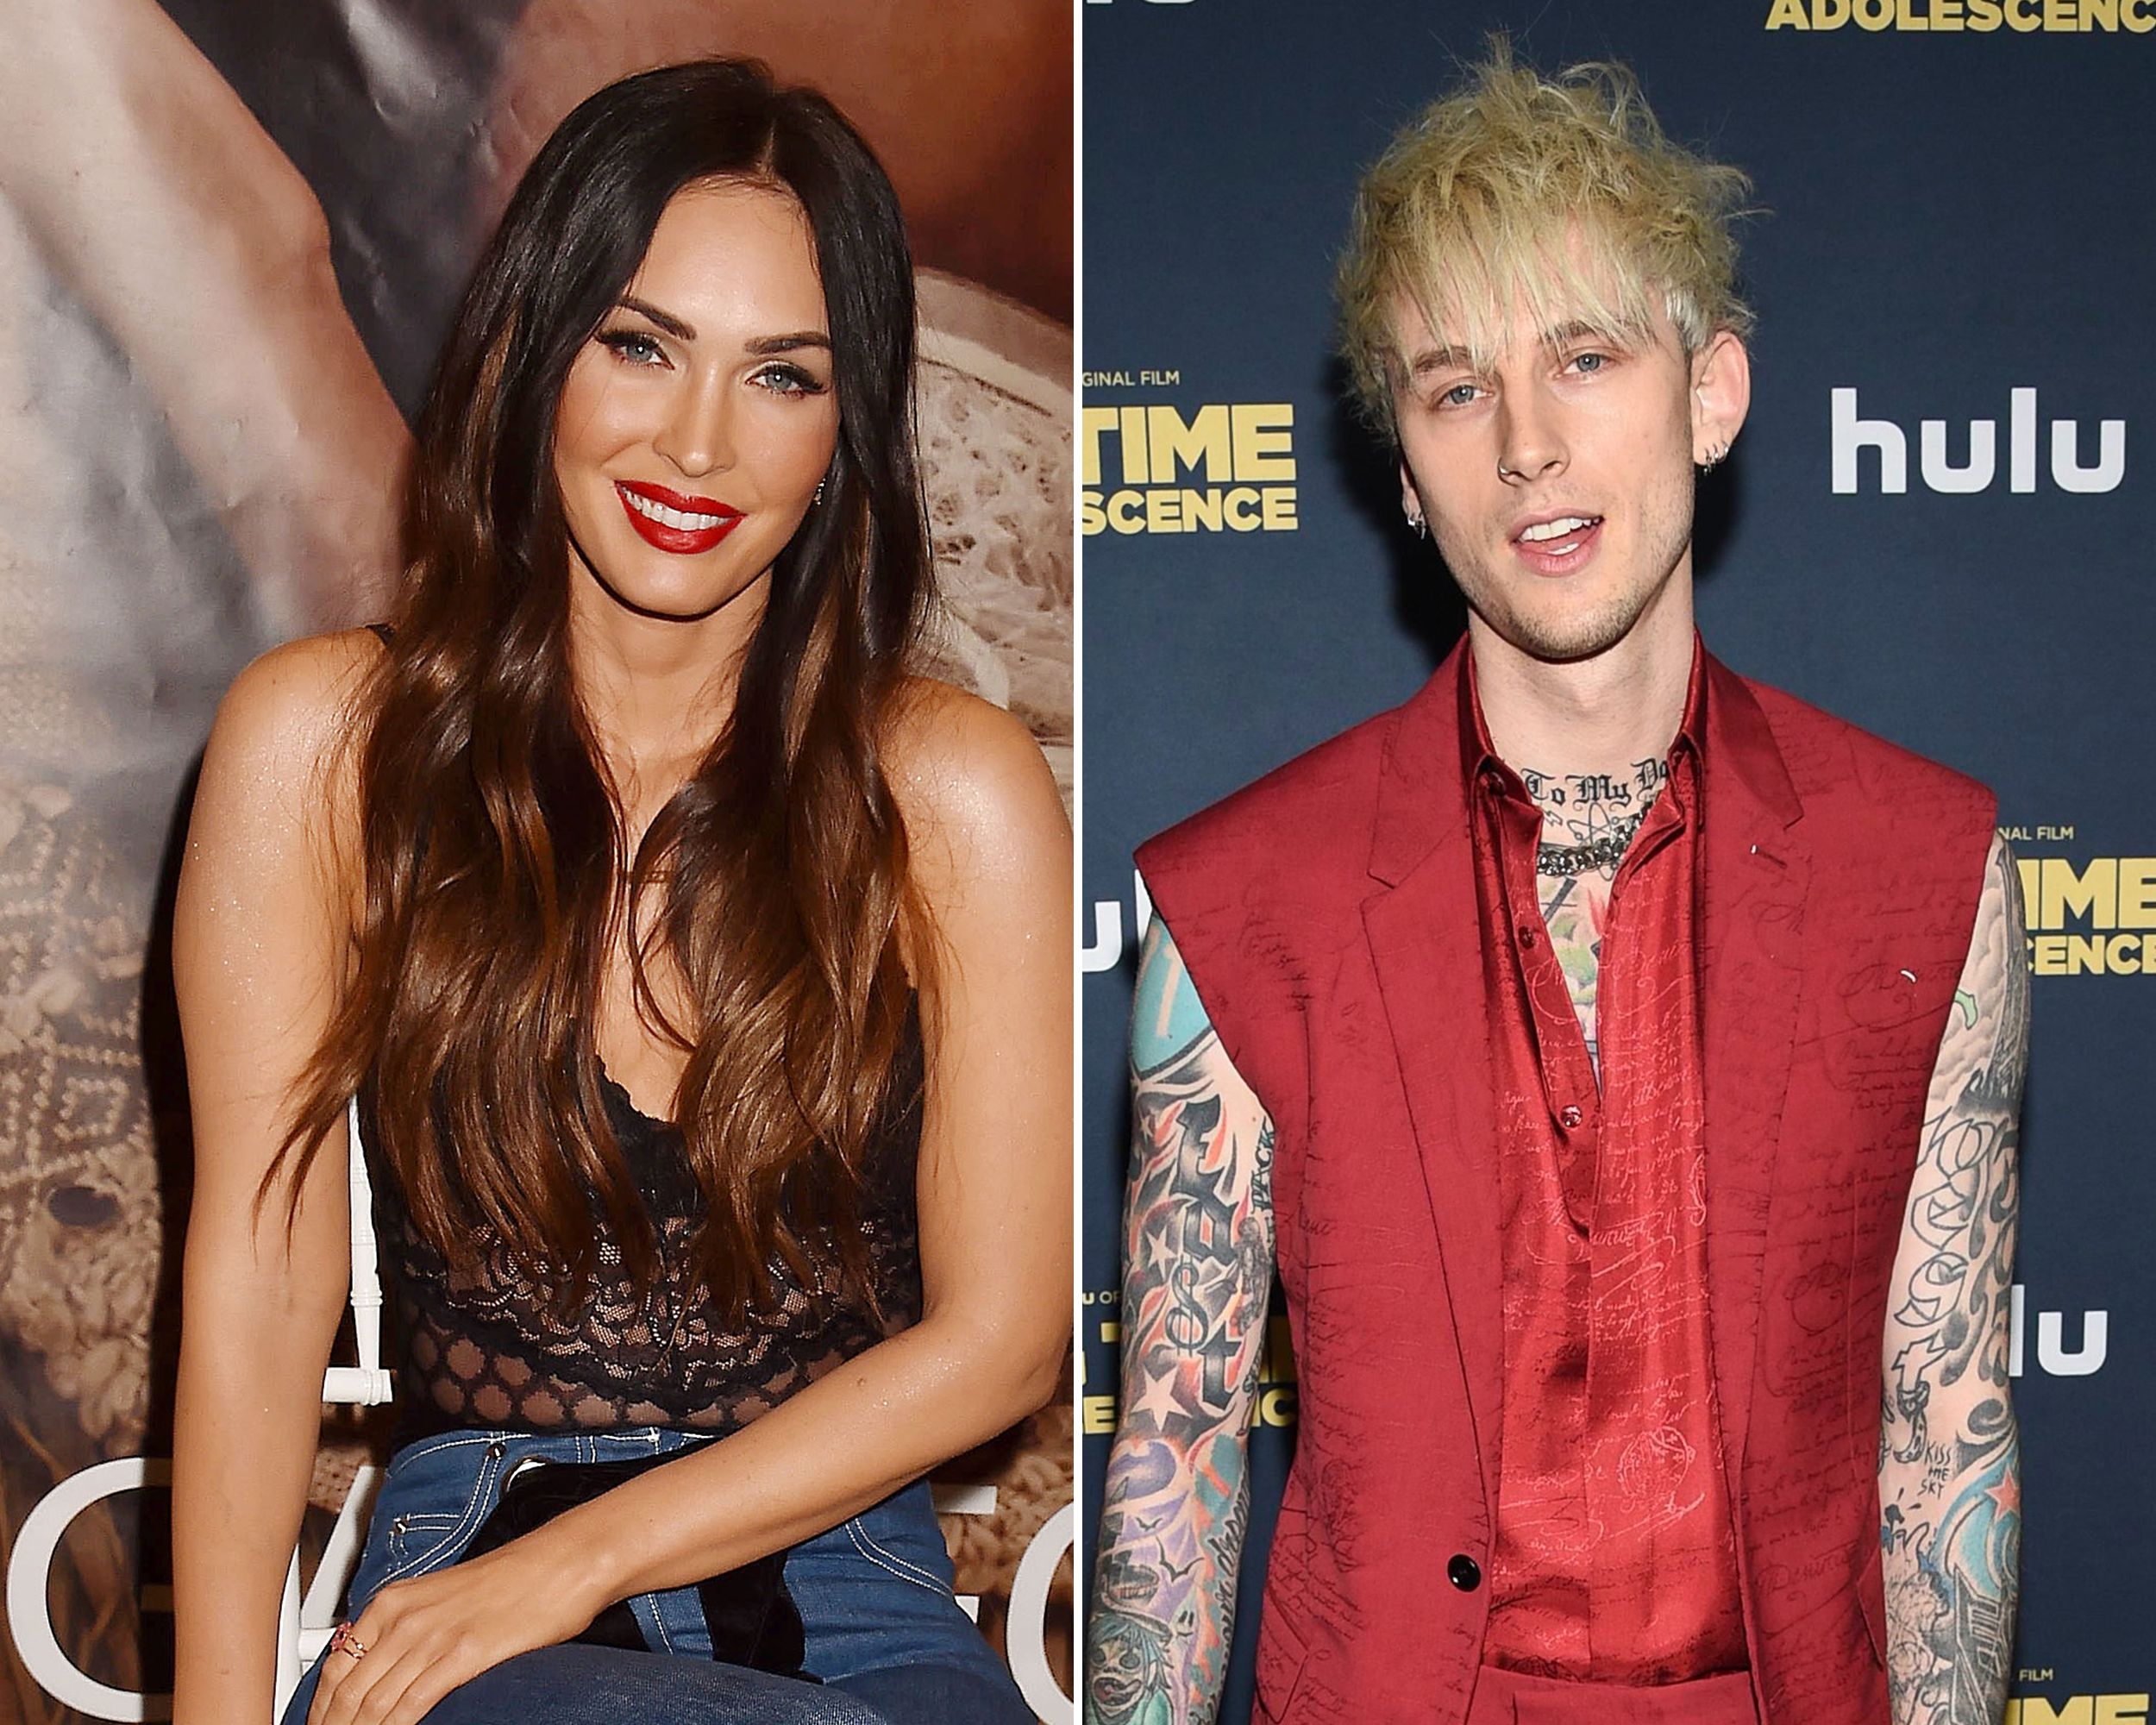 Real Celebrity Porn Megan Fox - Megan Fox and Machine Gun Kelly Have Been 'Hooking Up for Weeks'